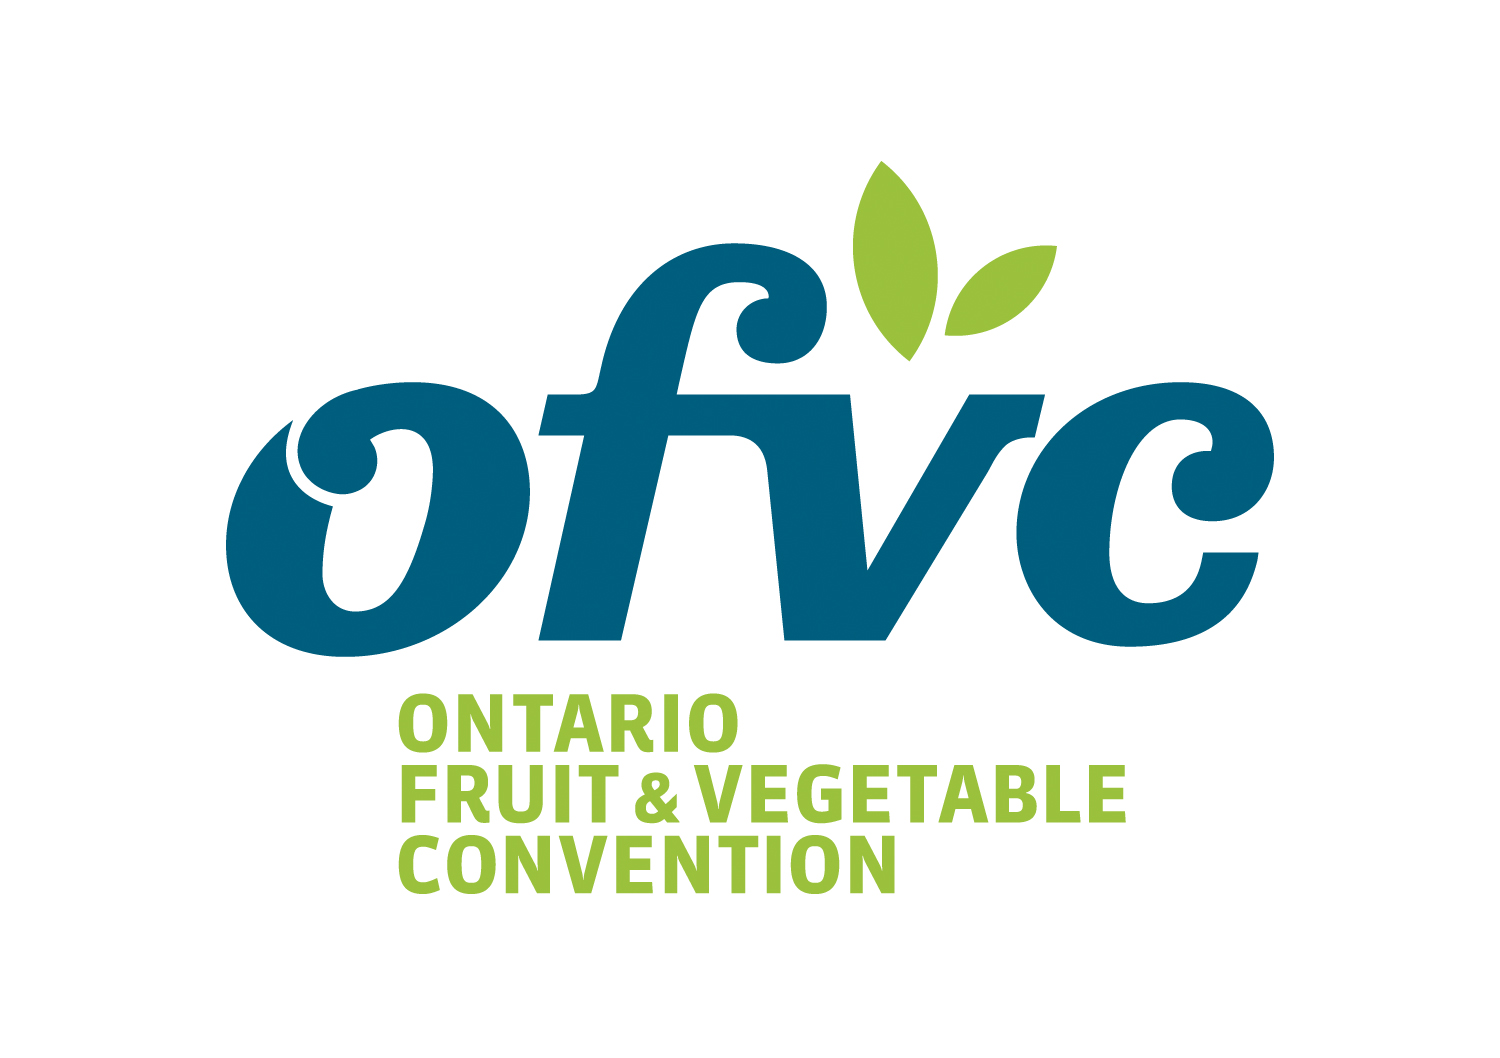 The Ontario Fruit and Vegetable Convention